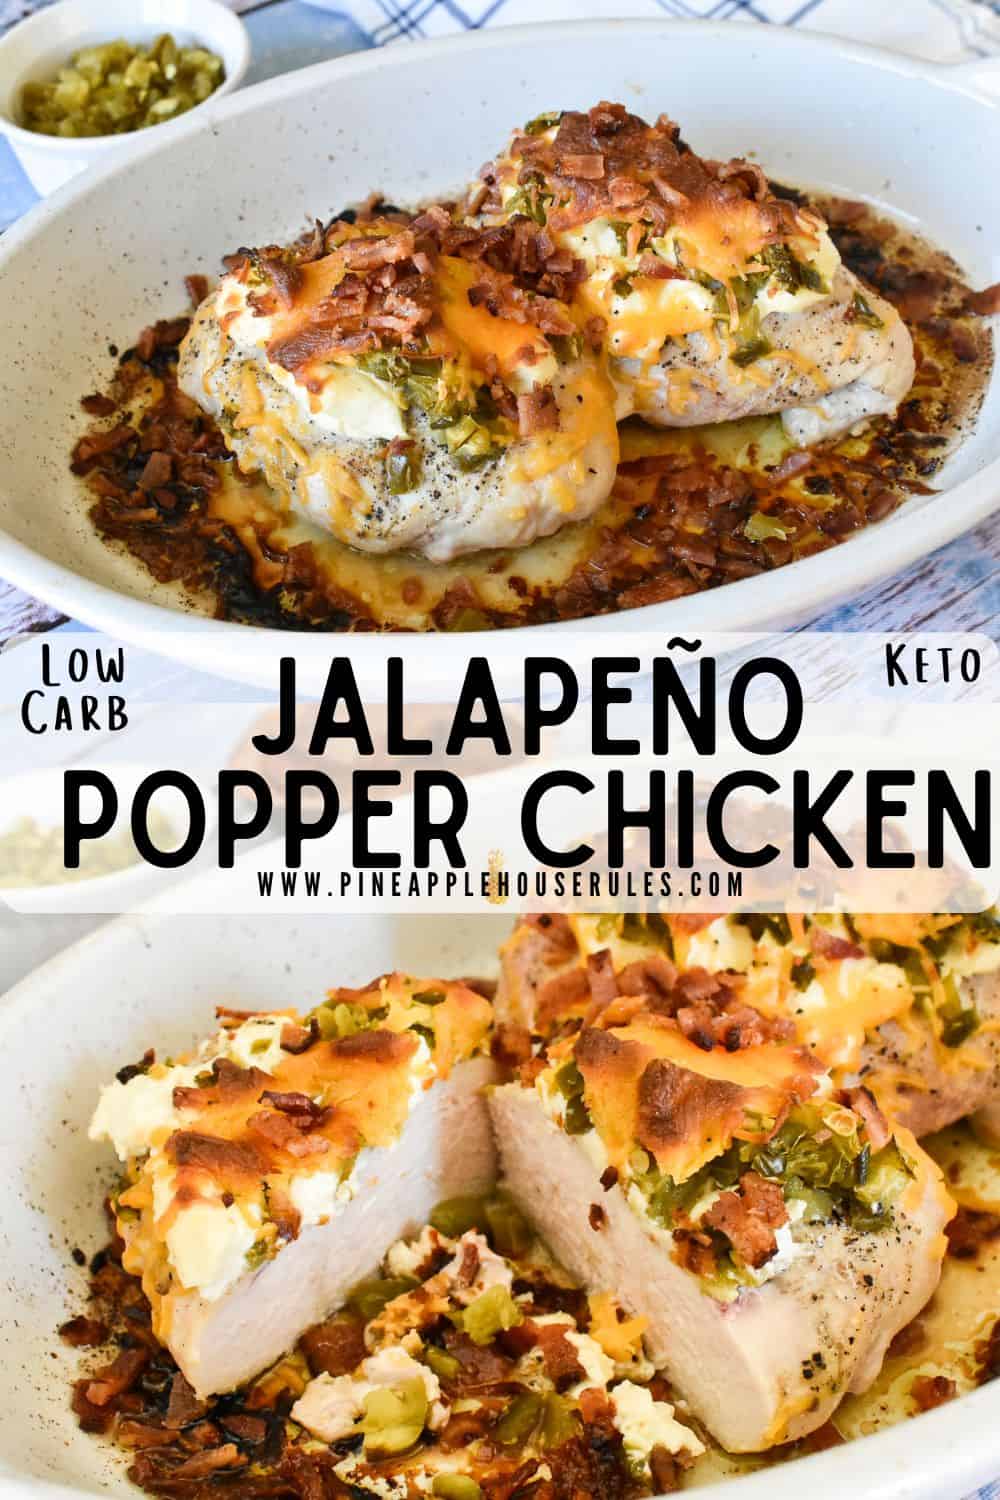 This Jalapeno Popper Chicken is perfect for a busy weeknight when you want a healthy, light dinner with just a few ingredients! It's low carb and Keto friendly, too. Plus, it's garnished with bacon! Jalapeno Popper Chicken | Jalapeno Popper Chicken Keto | Jalapeno Popper Chicken Casserole | Jalapeno Popper Chicken Casserole Keto | Low Carb Recipes | Low Carb Meals | Low Carb Dinner | Low Carb Dinner Recipes | Low Carb Dinner Ideas | Low Carb Dinner Healthy | Low Carb Dinner Easy | Easy Recipes